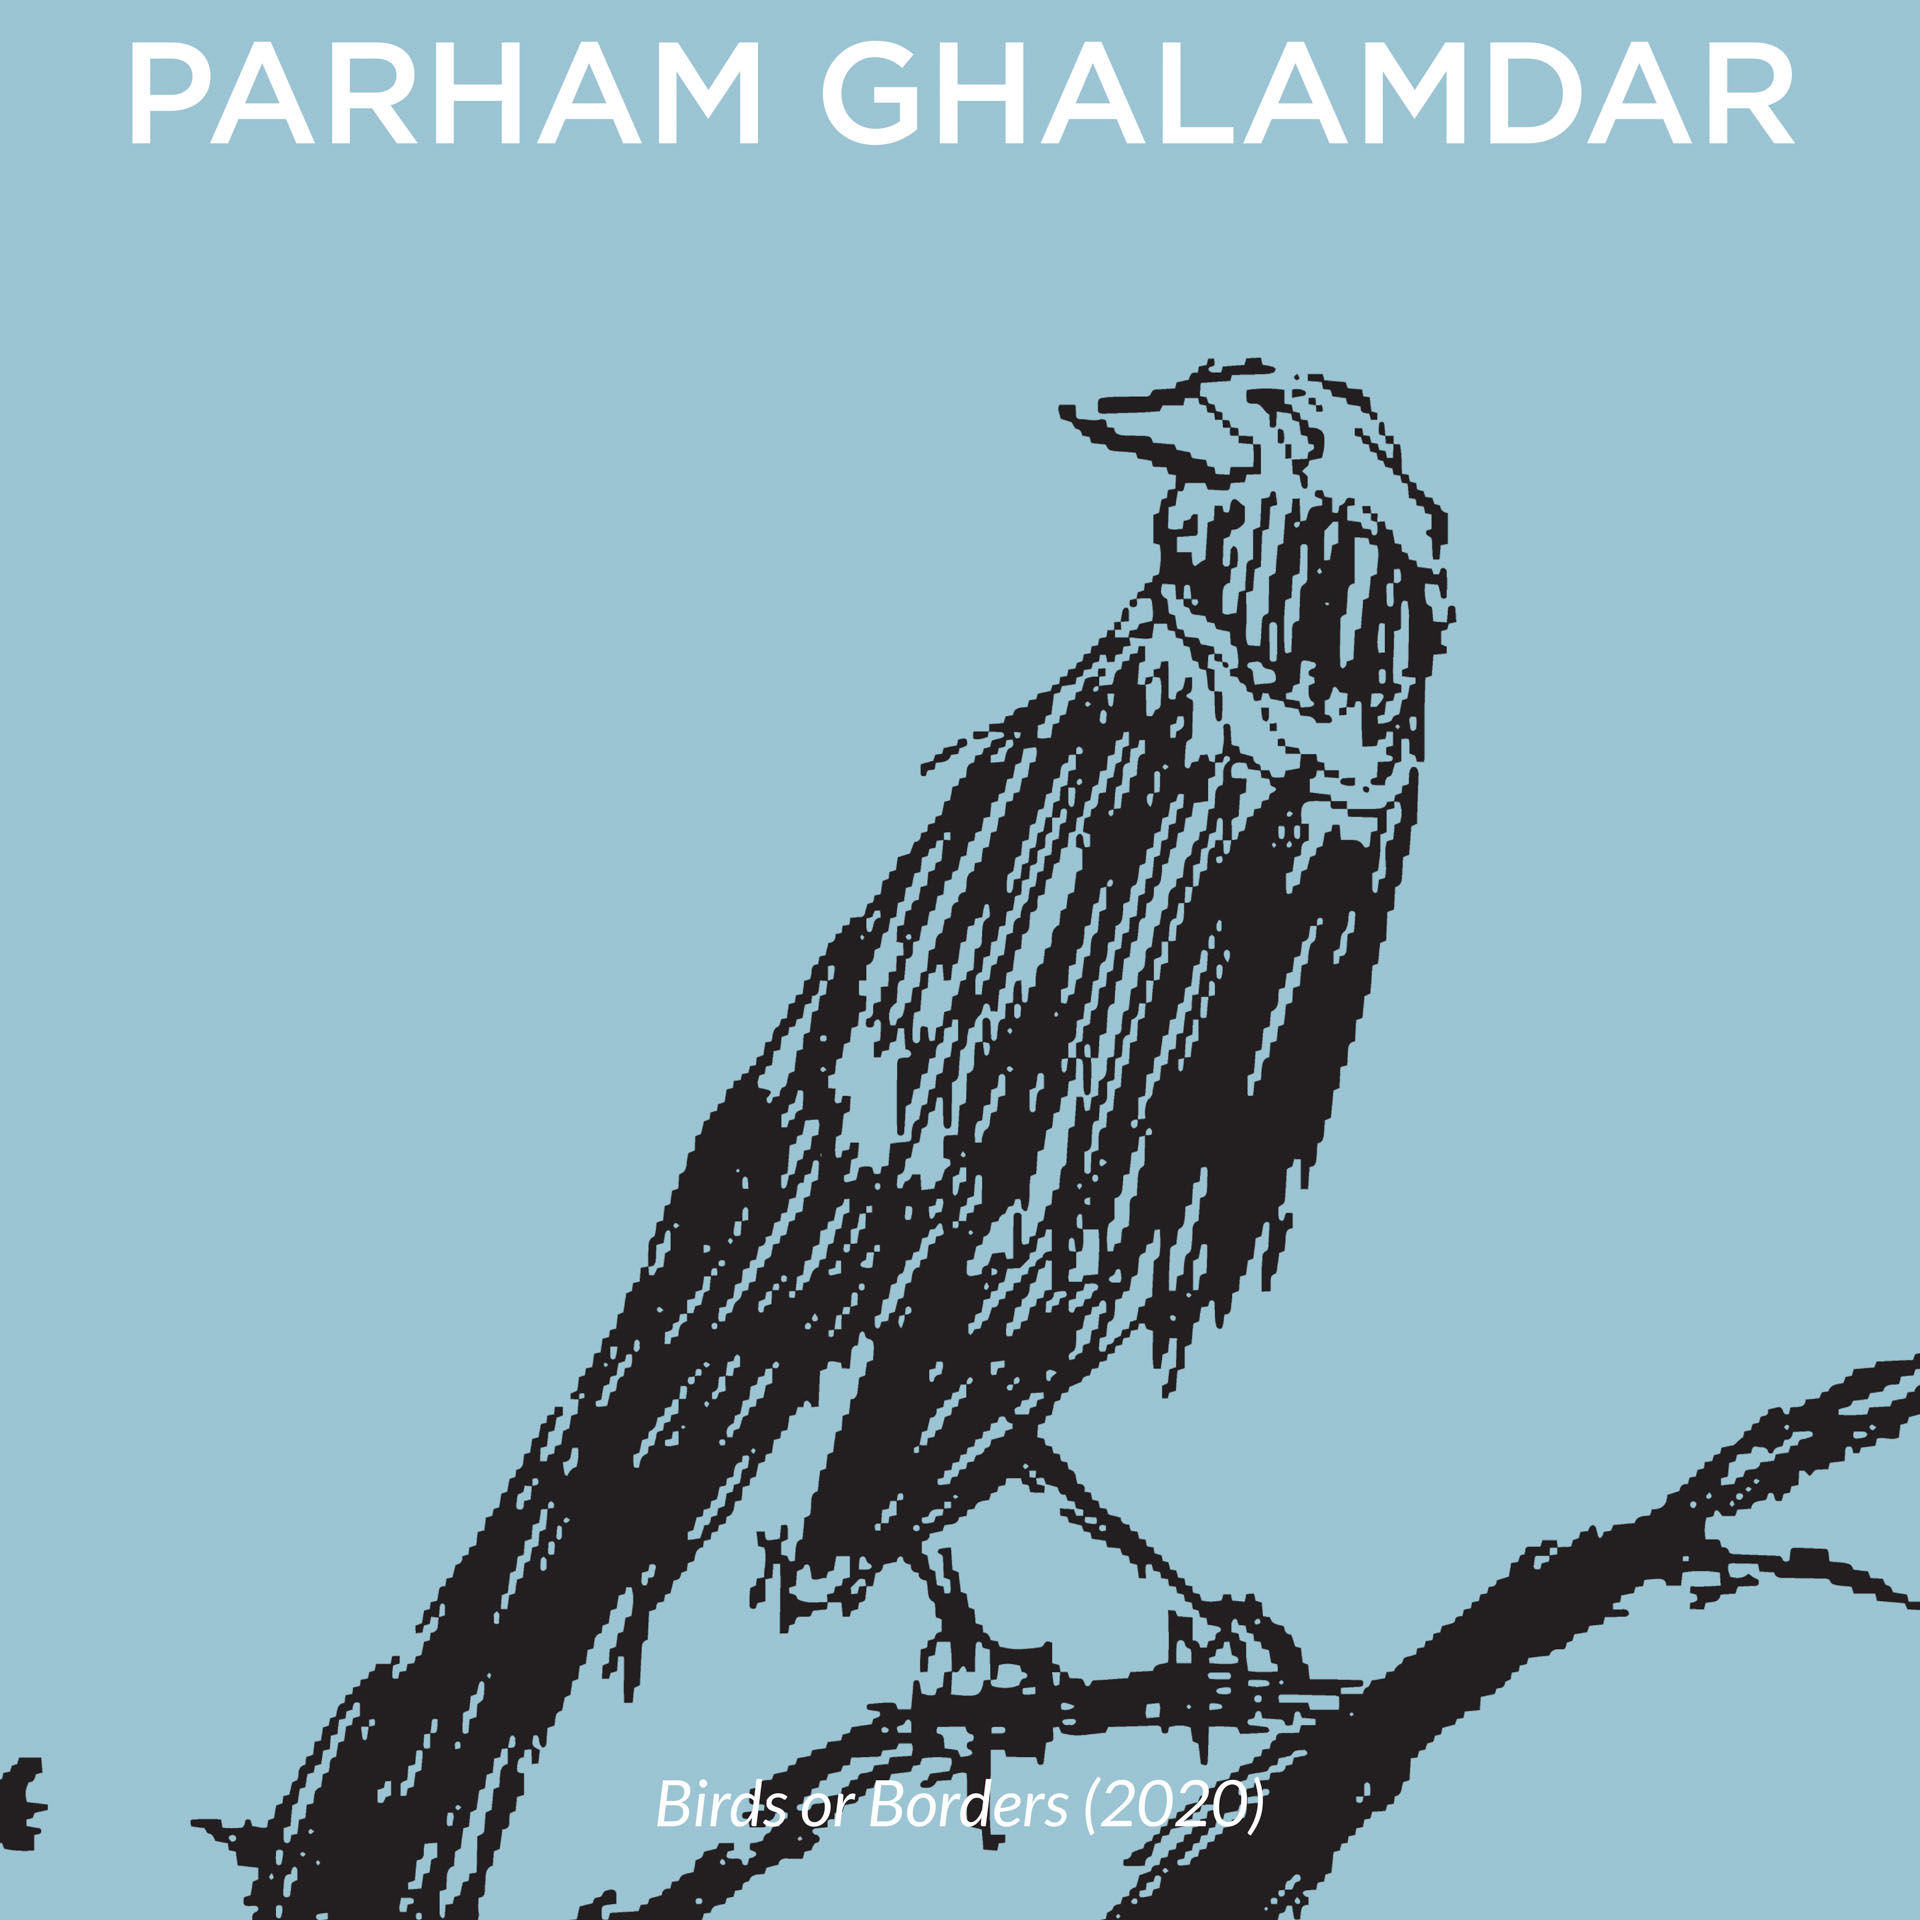 A drawing in black showing a bird sat on a branch. The background is a baby blue colour.